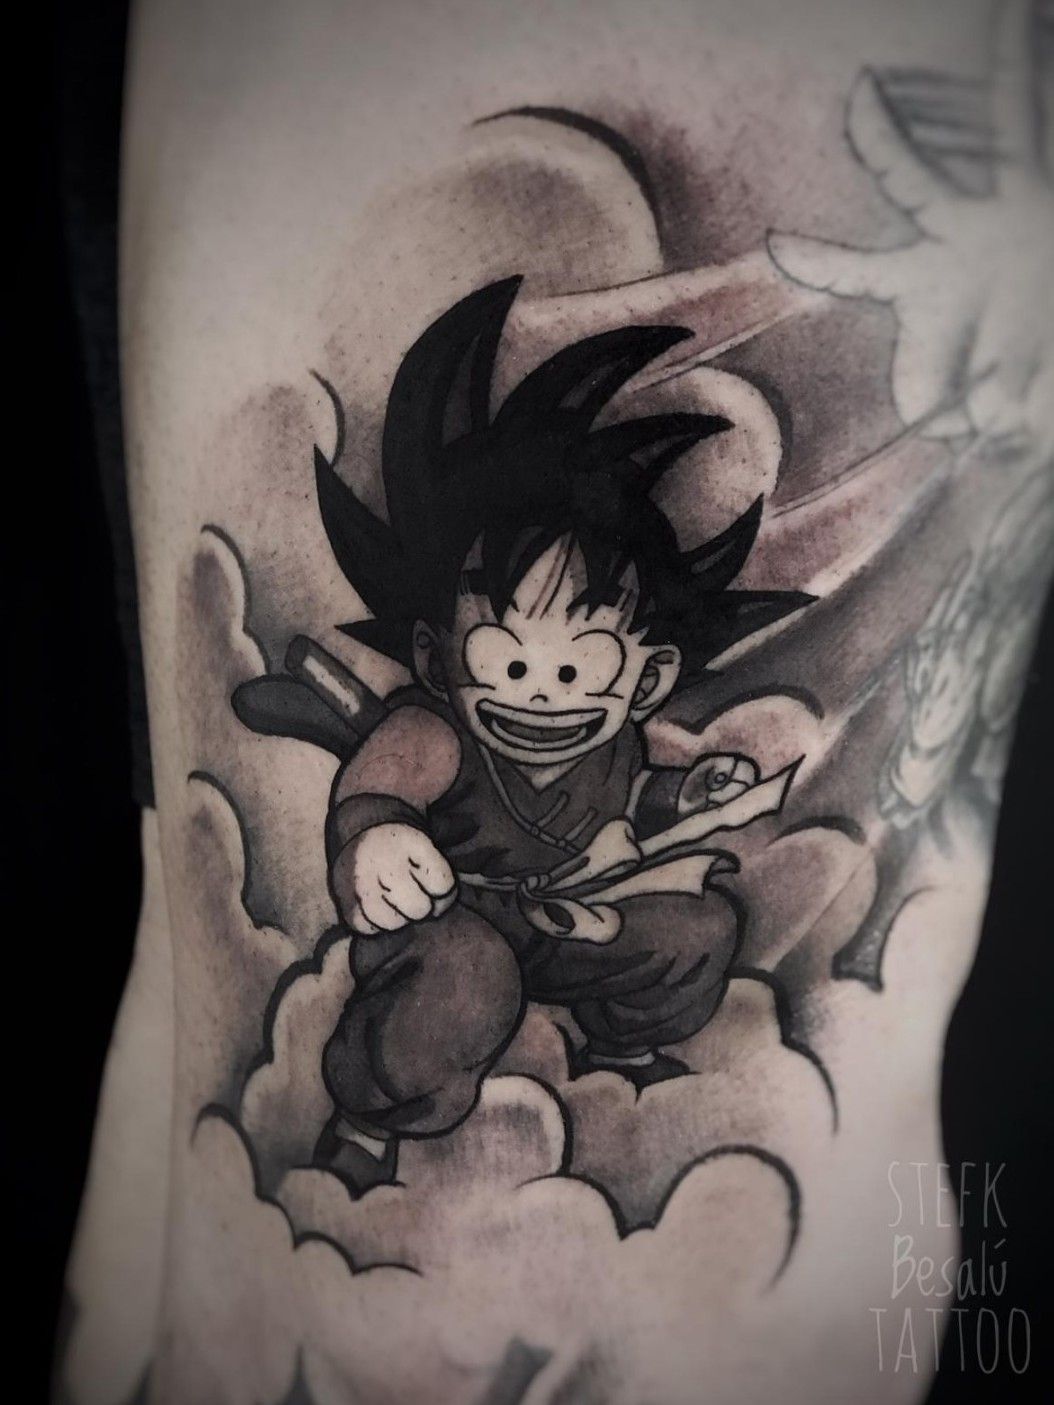 Goku tattoo design by loveinkzonetattoos fee days back Ist sitting done  for forearm Soon full sleeve will be completed after this  Instagram